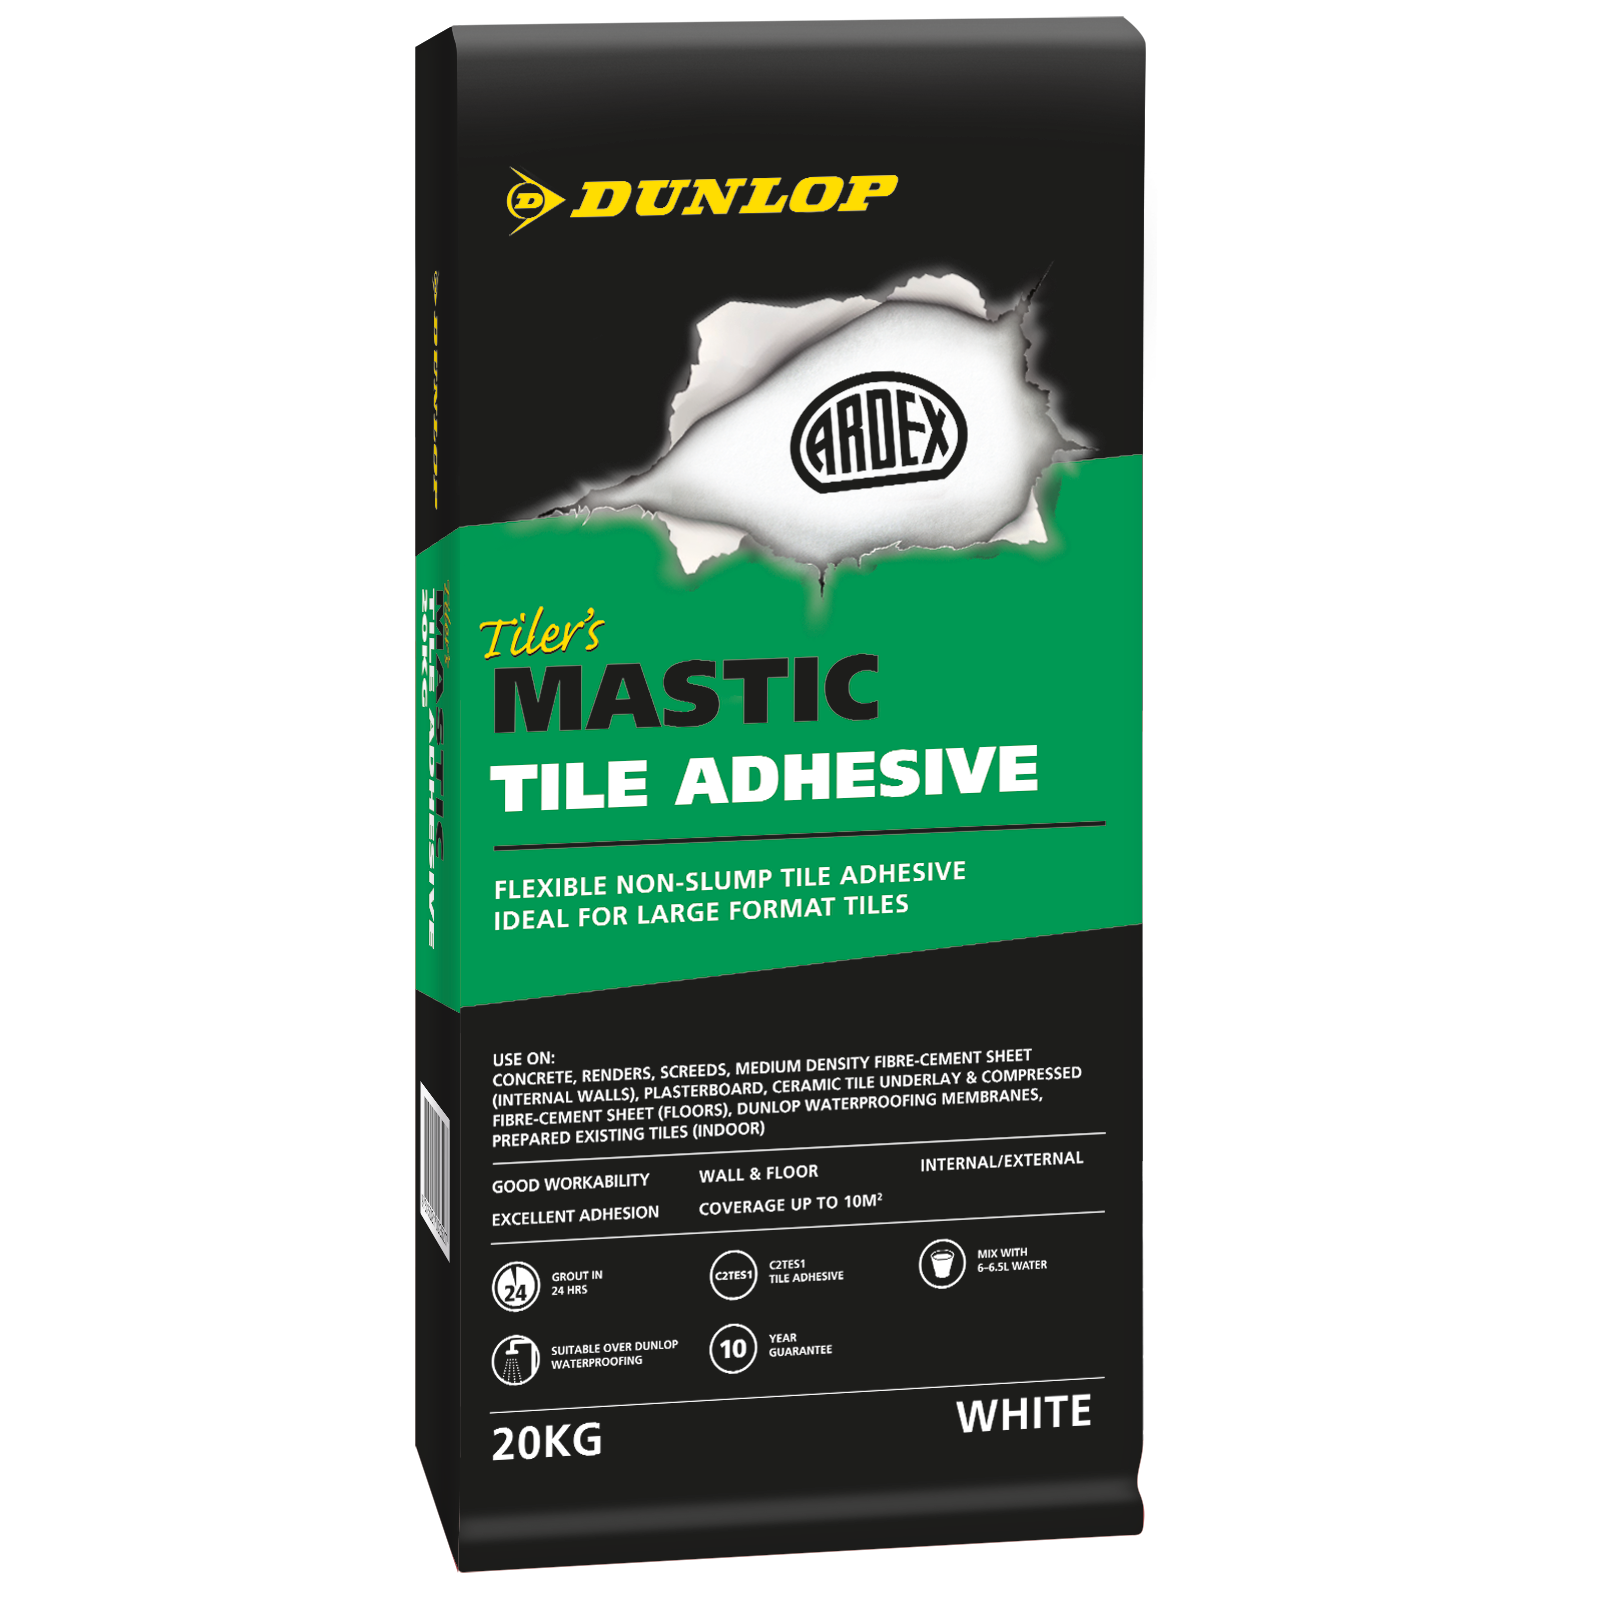 Browse Dunlop Wall & Floor Tile Adhesive - Dunlop Trade